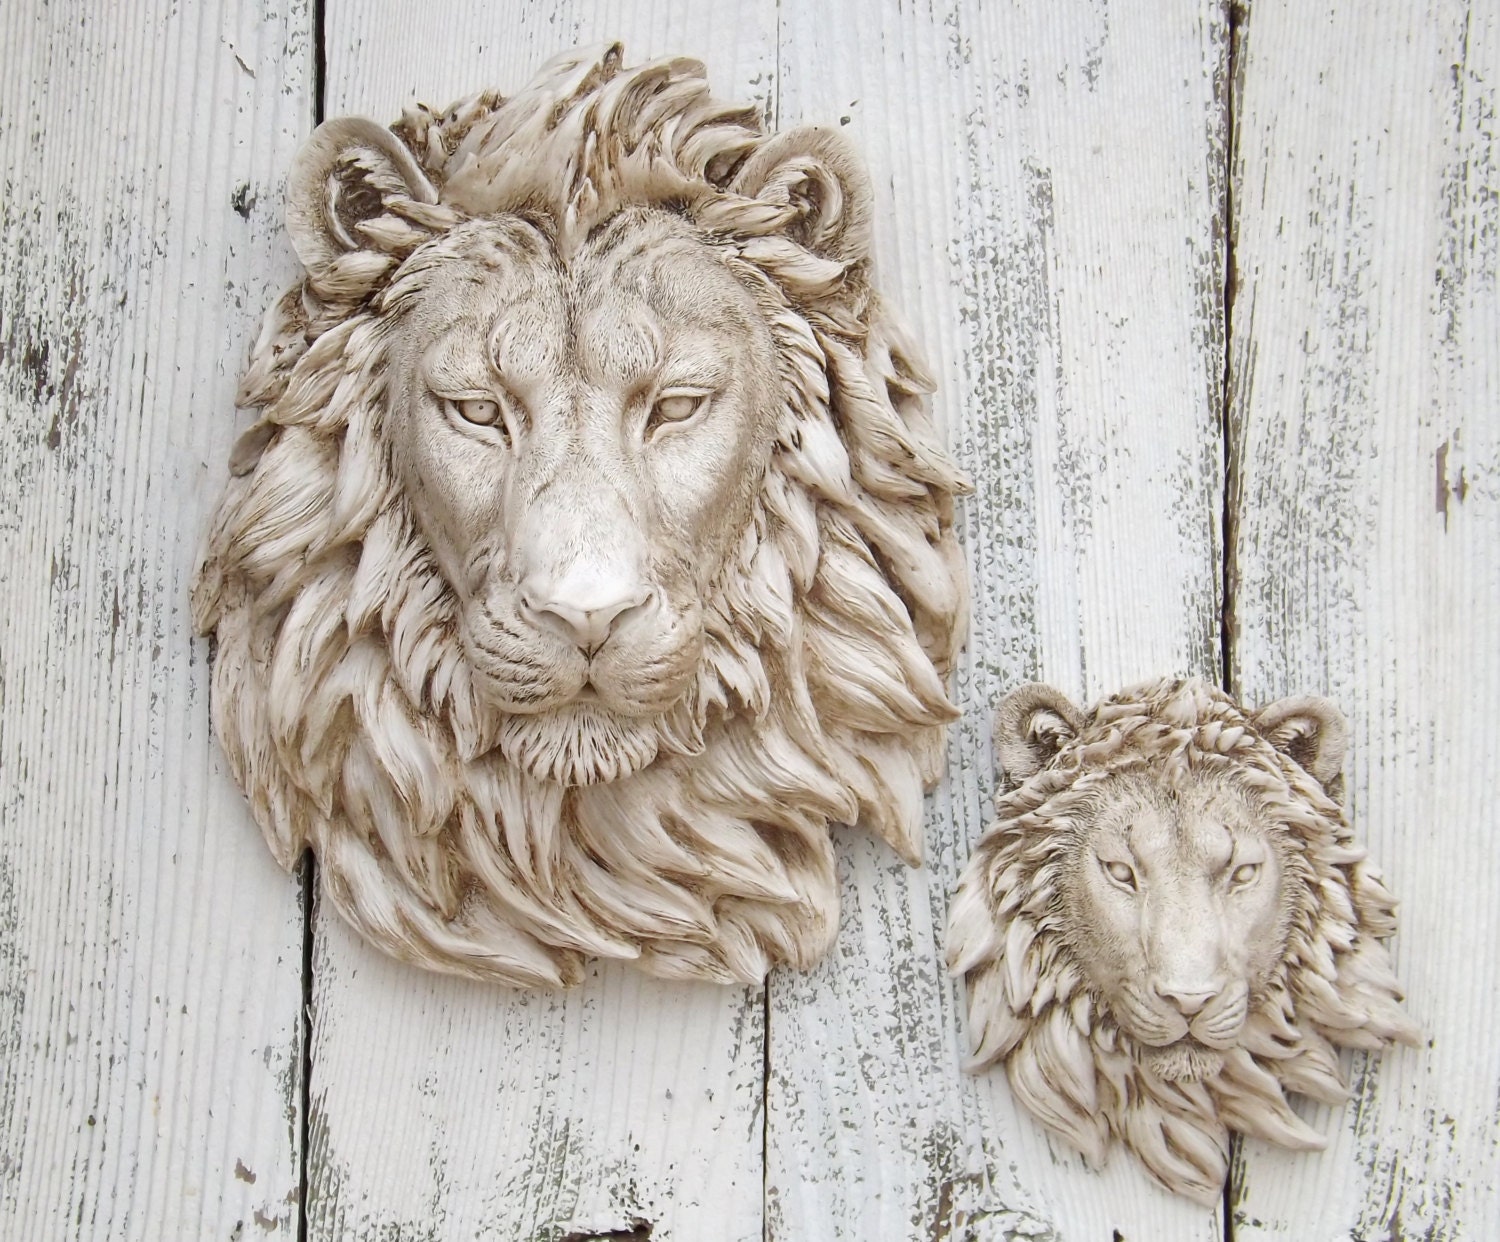 Lion Home Decor / Resin Black Lion Statue With Golden Crown - See more of lion home decor on facebook.